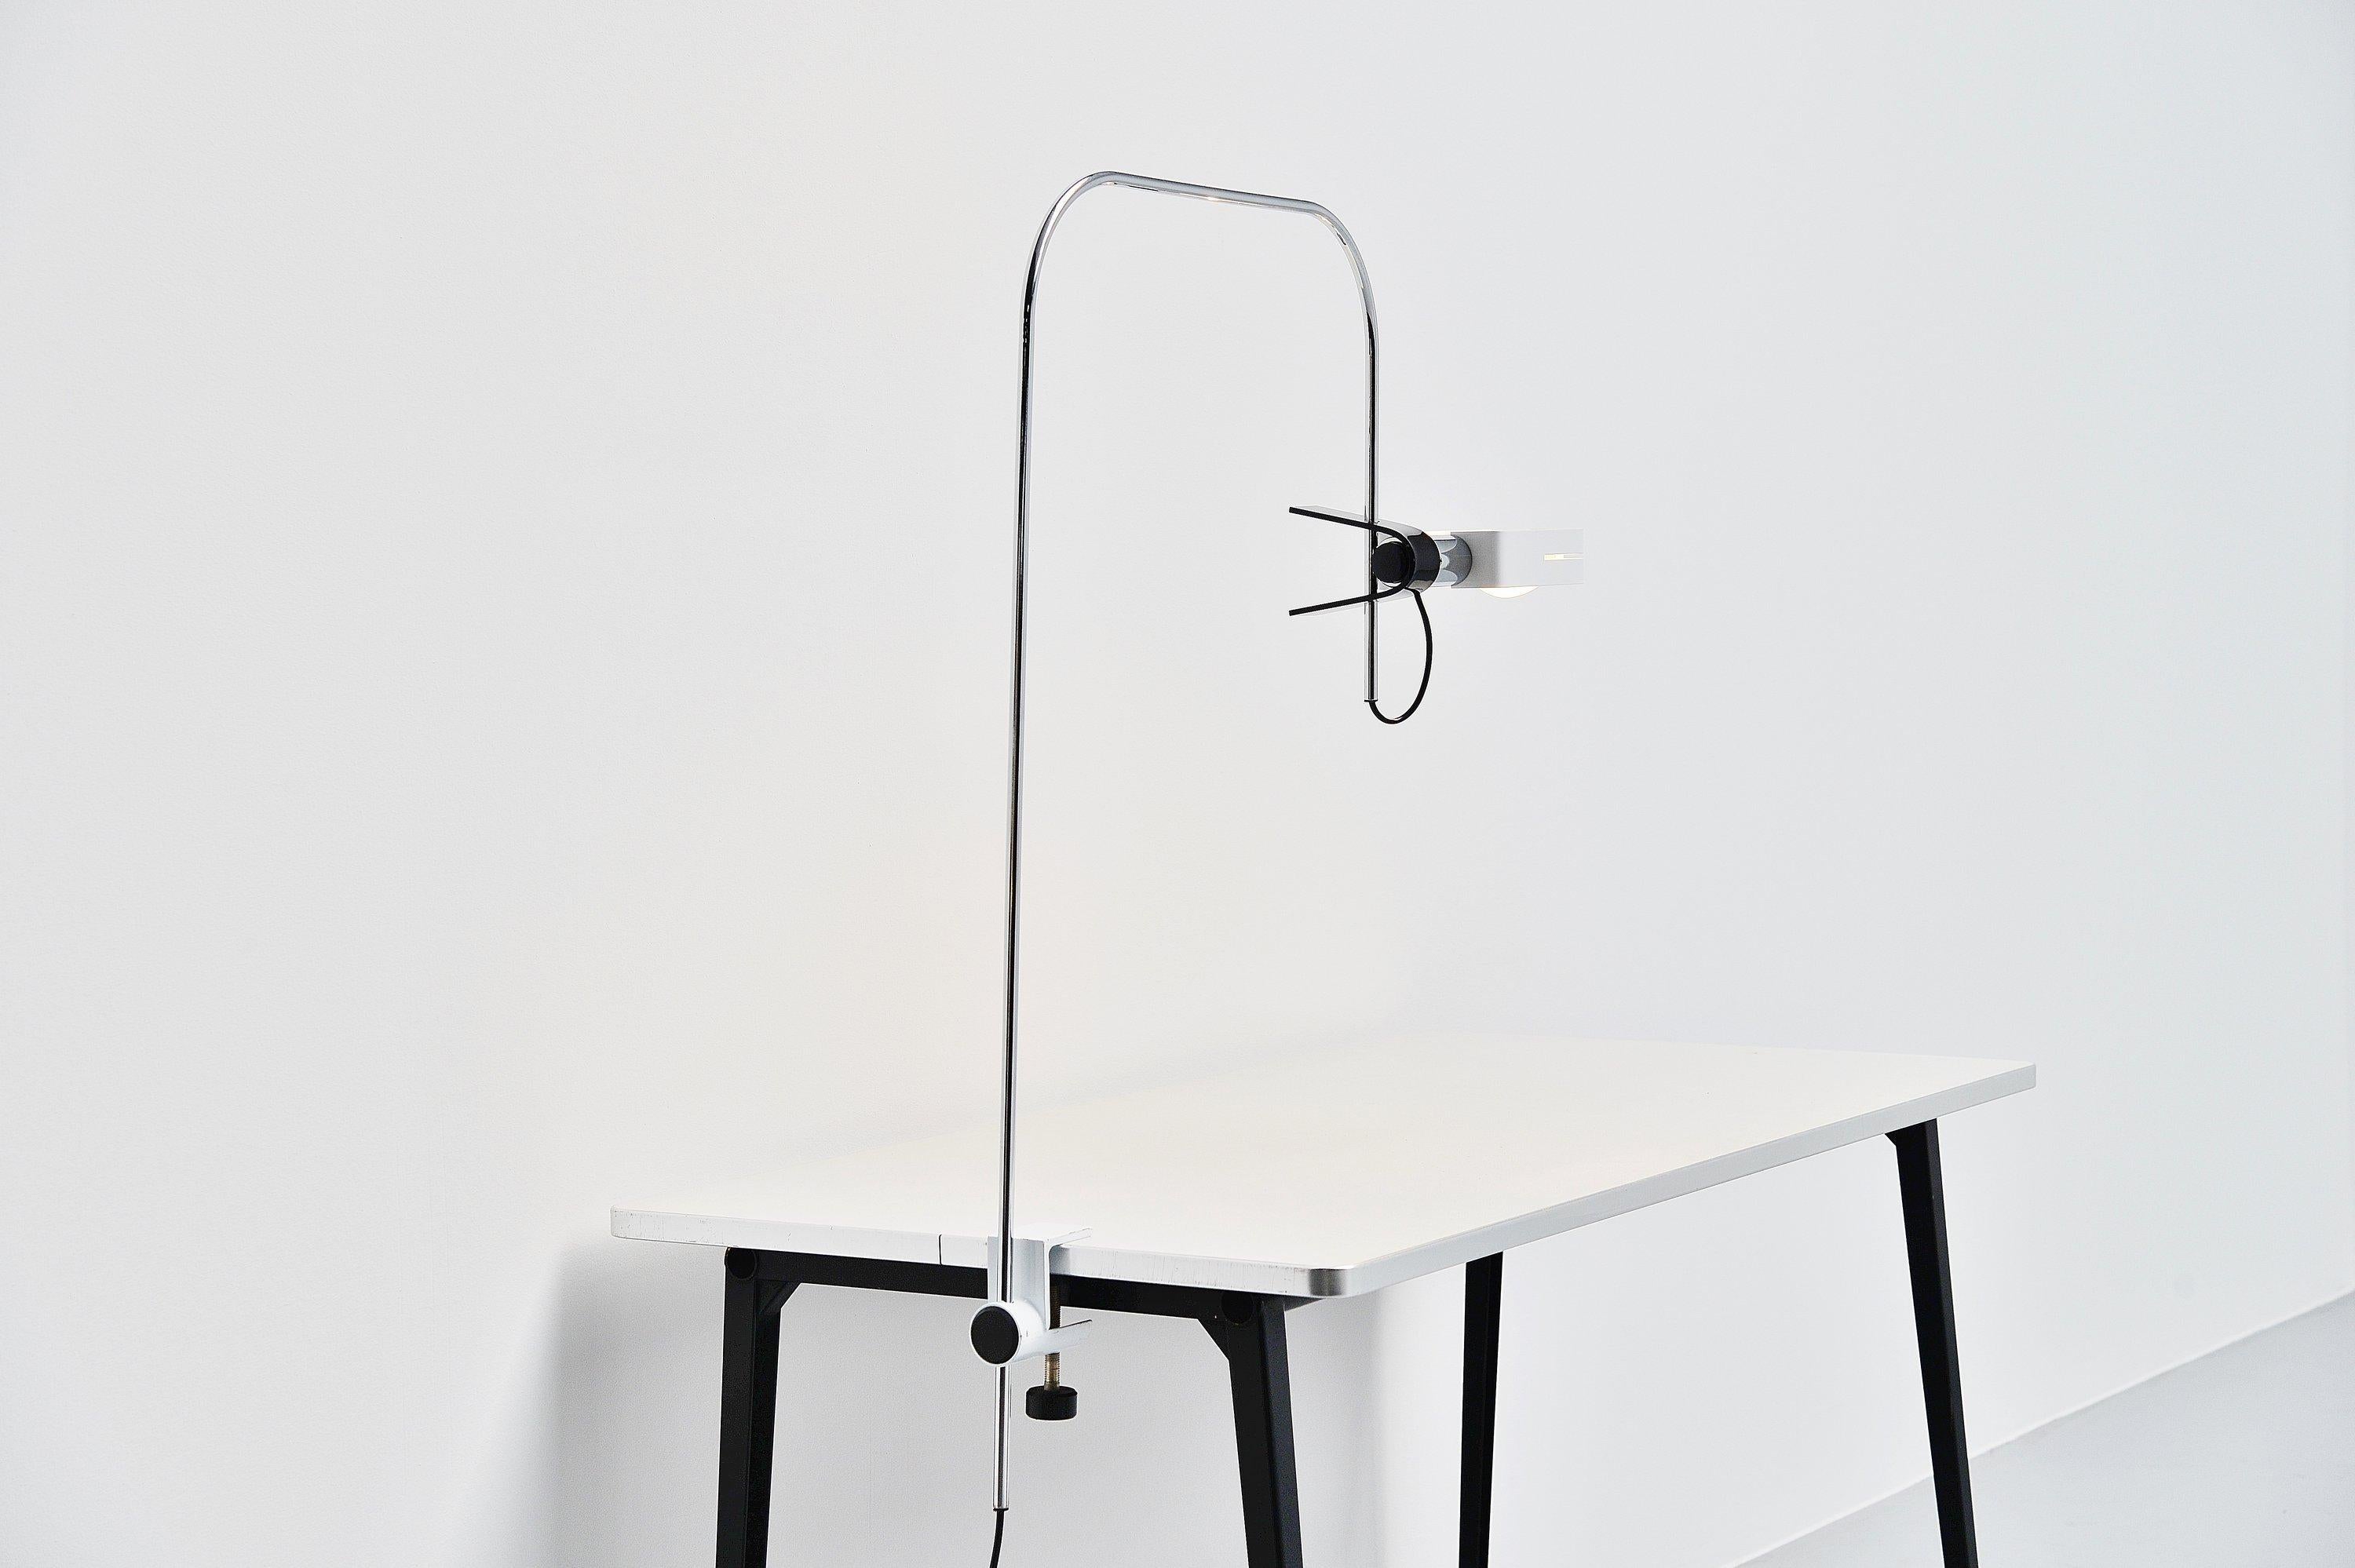 Very nice minimal clamp desk lamp made by Piuluce, Italy, 1970. This desk lamp has a very nice ingenious system which is similar to the designs by Renato Forti for Oluce. The lamp can be clamped easily to a desk or table and is adjustable in height.